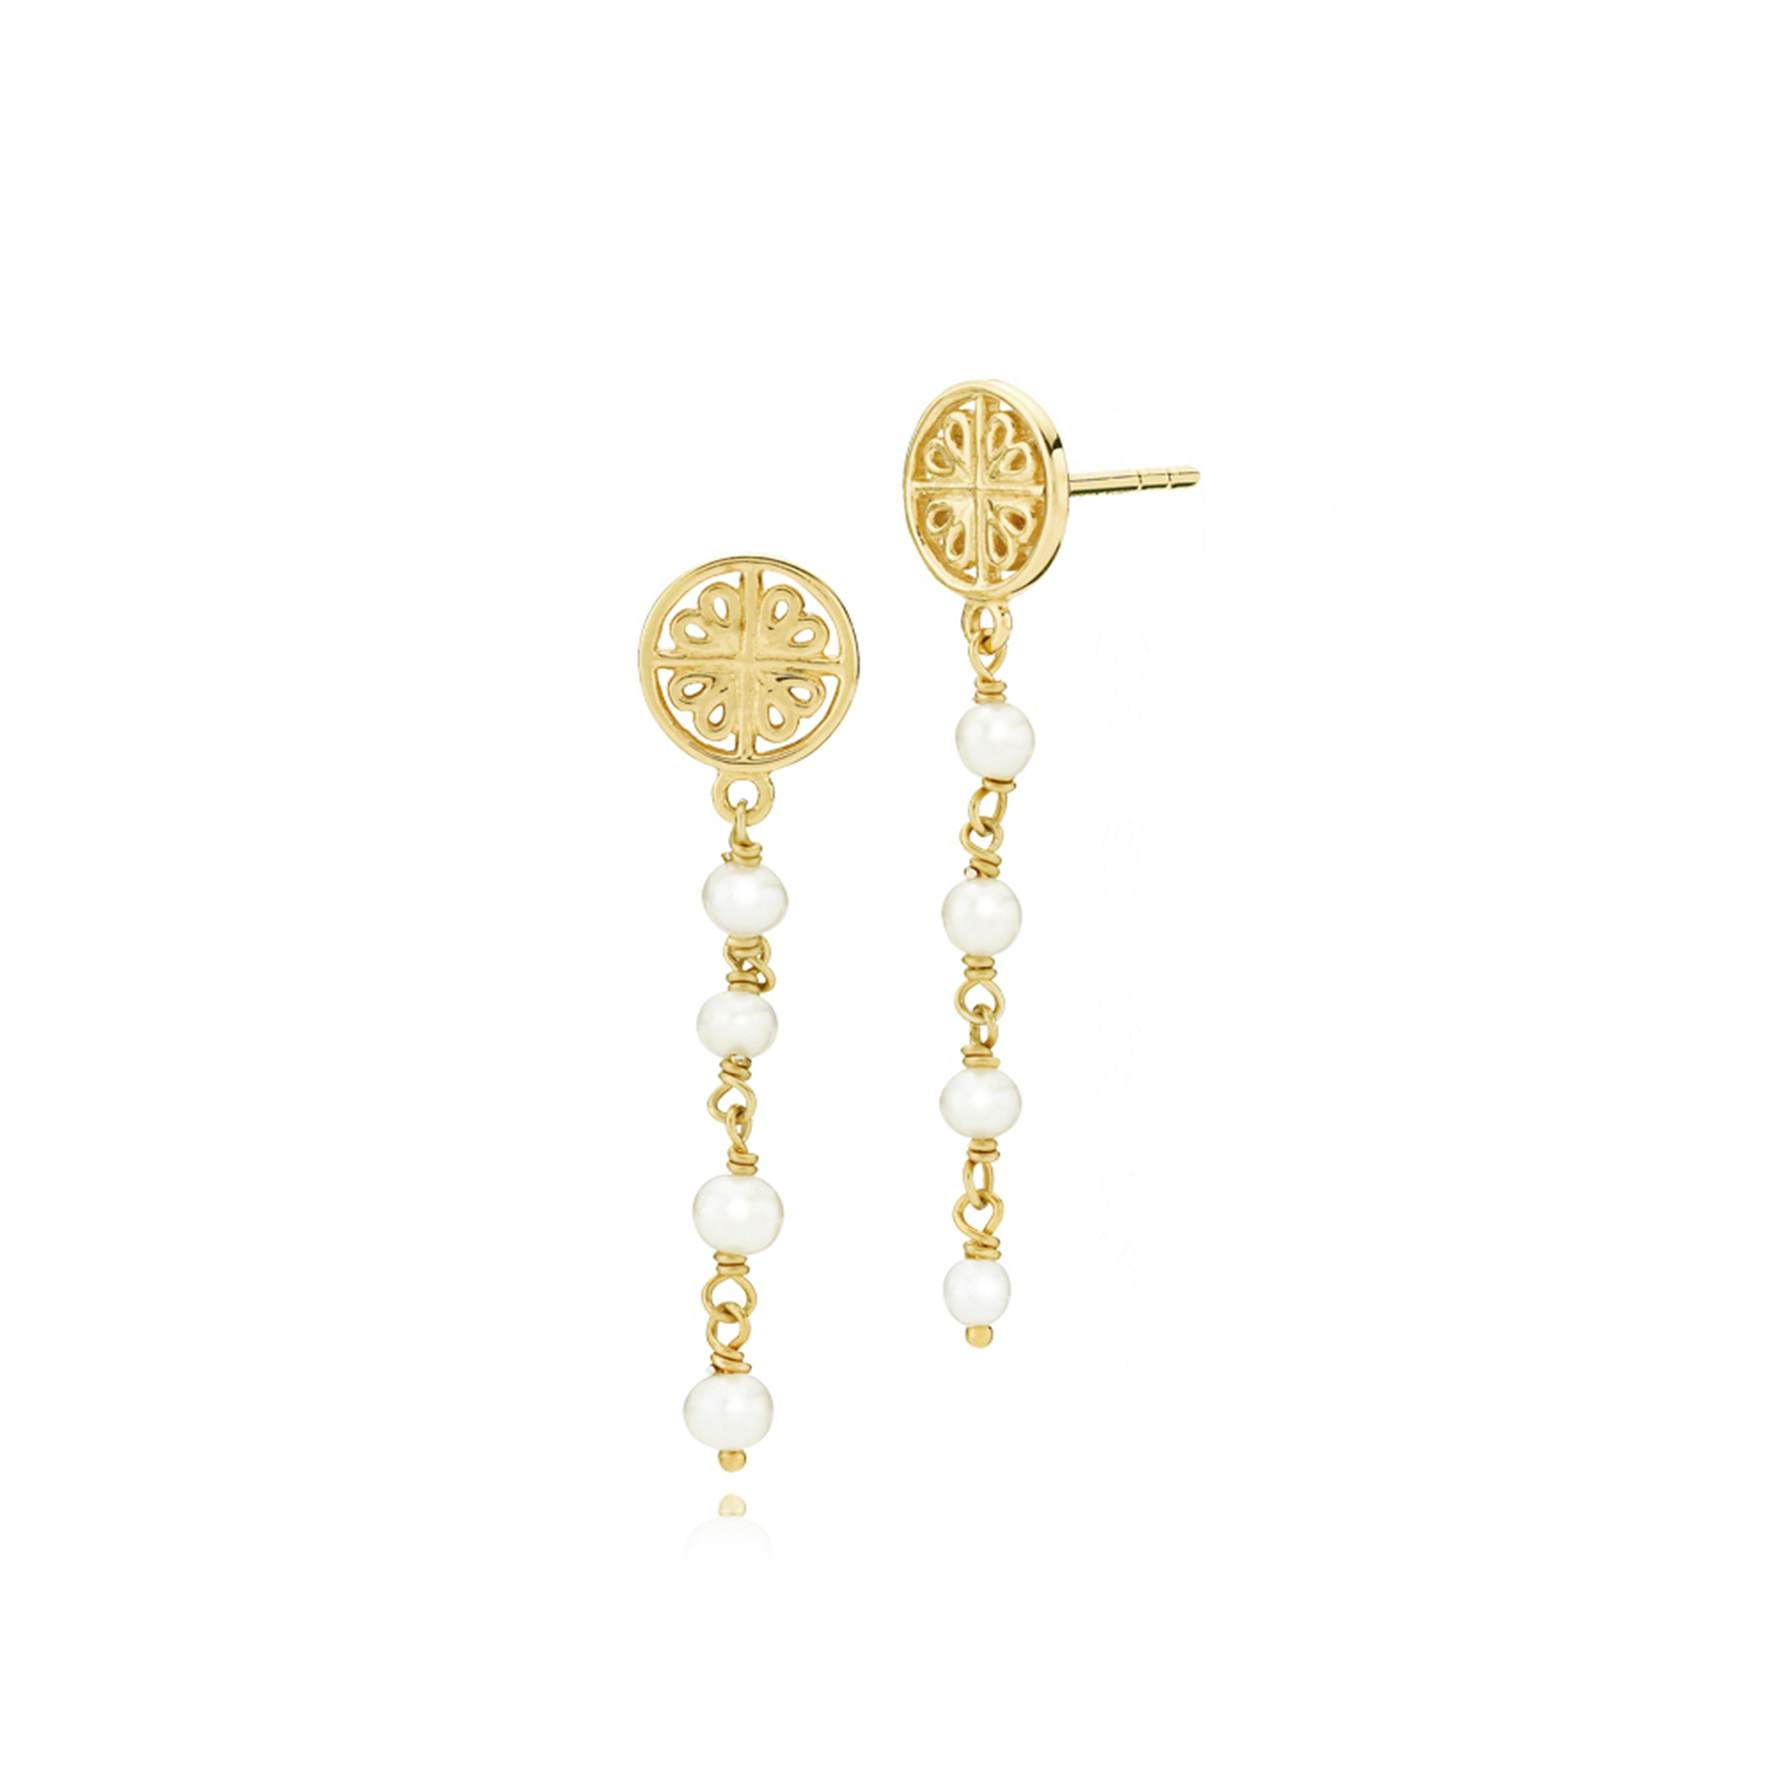 Balance Earrings With Pearl from Sistie in Goldplated-Silver Sterling 925|Freshwater Pearl